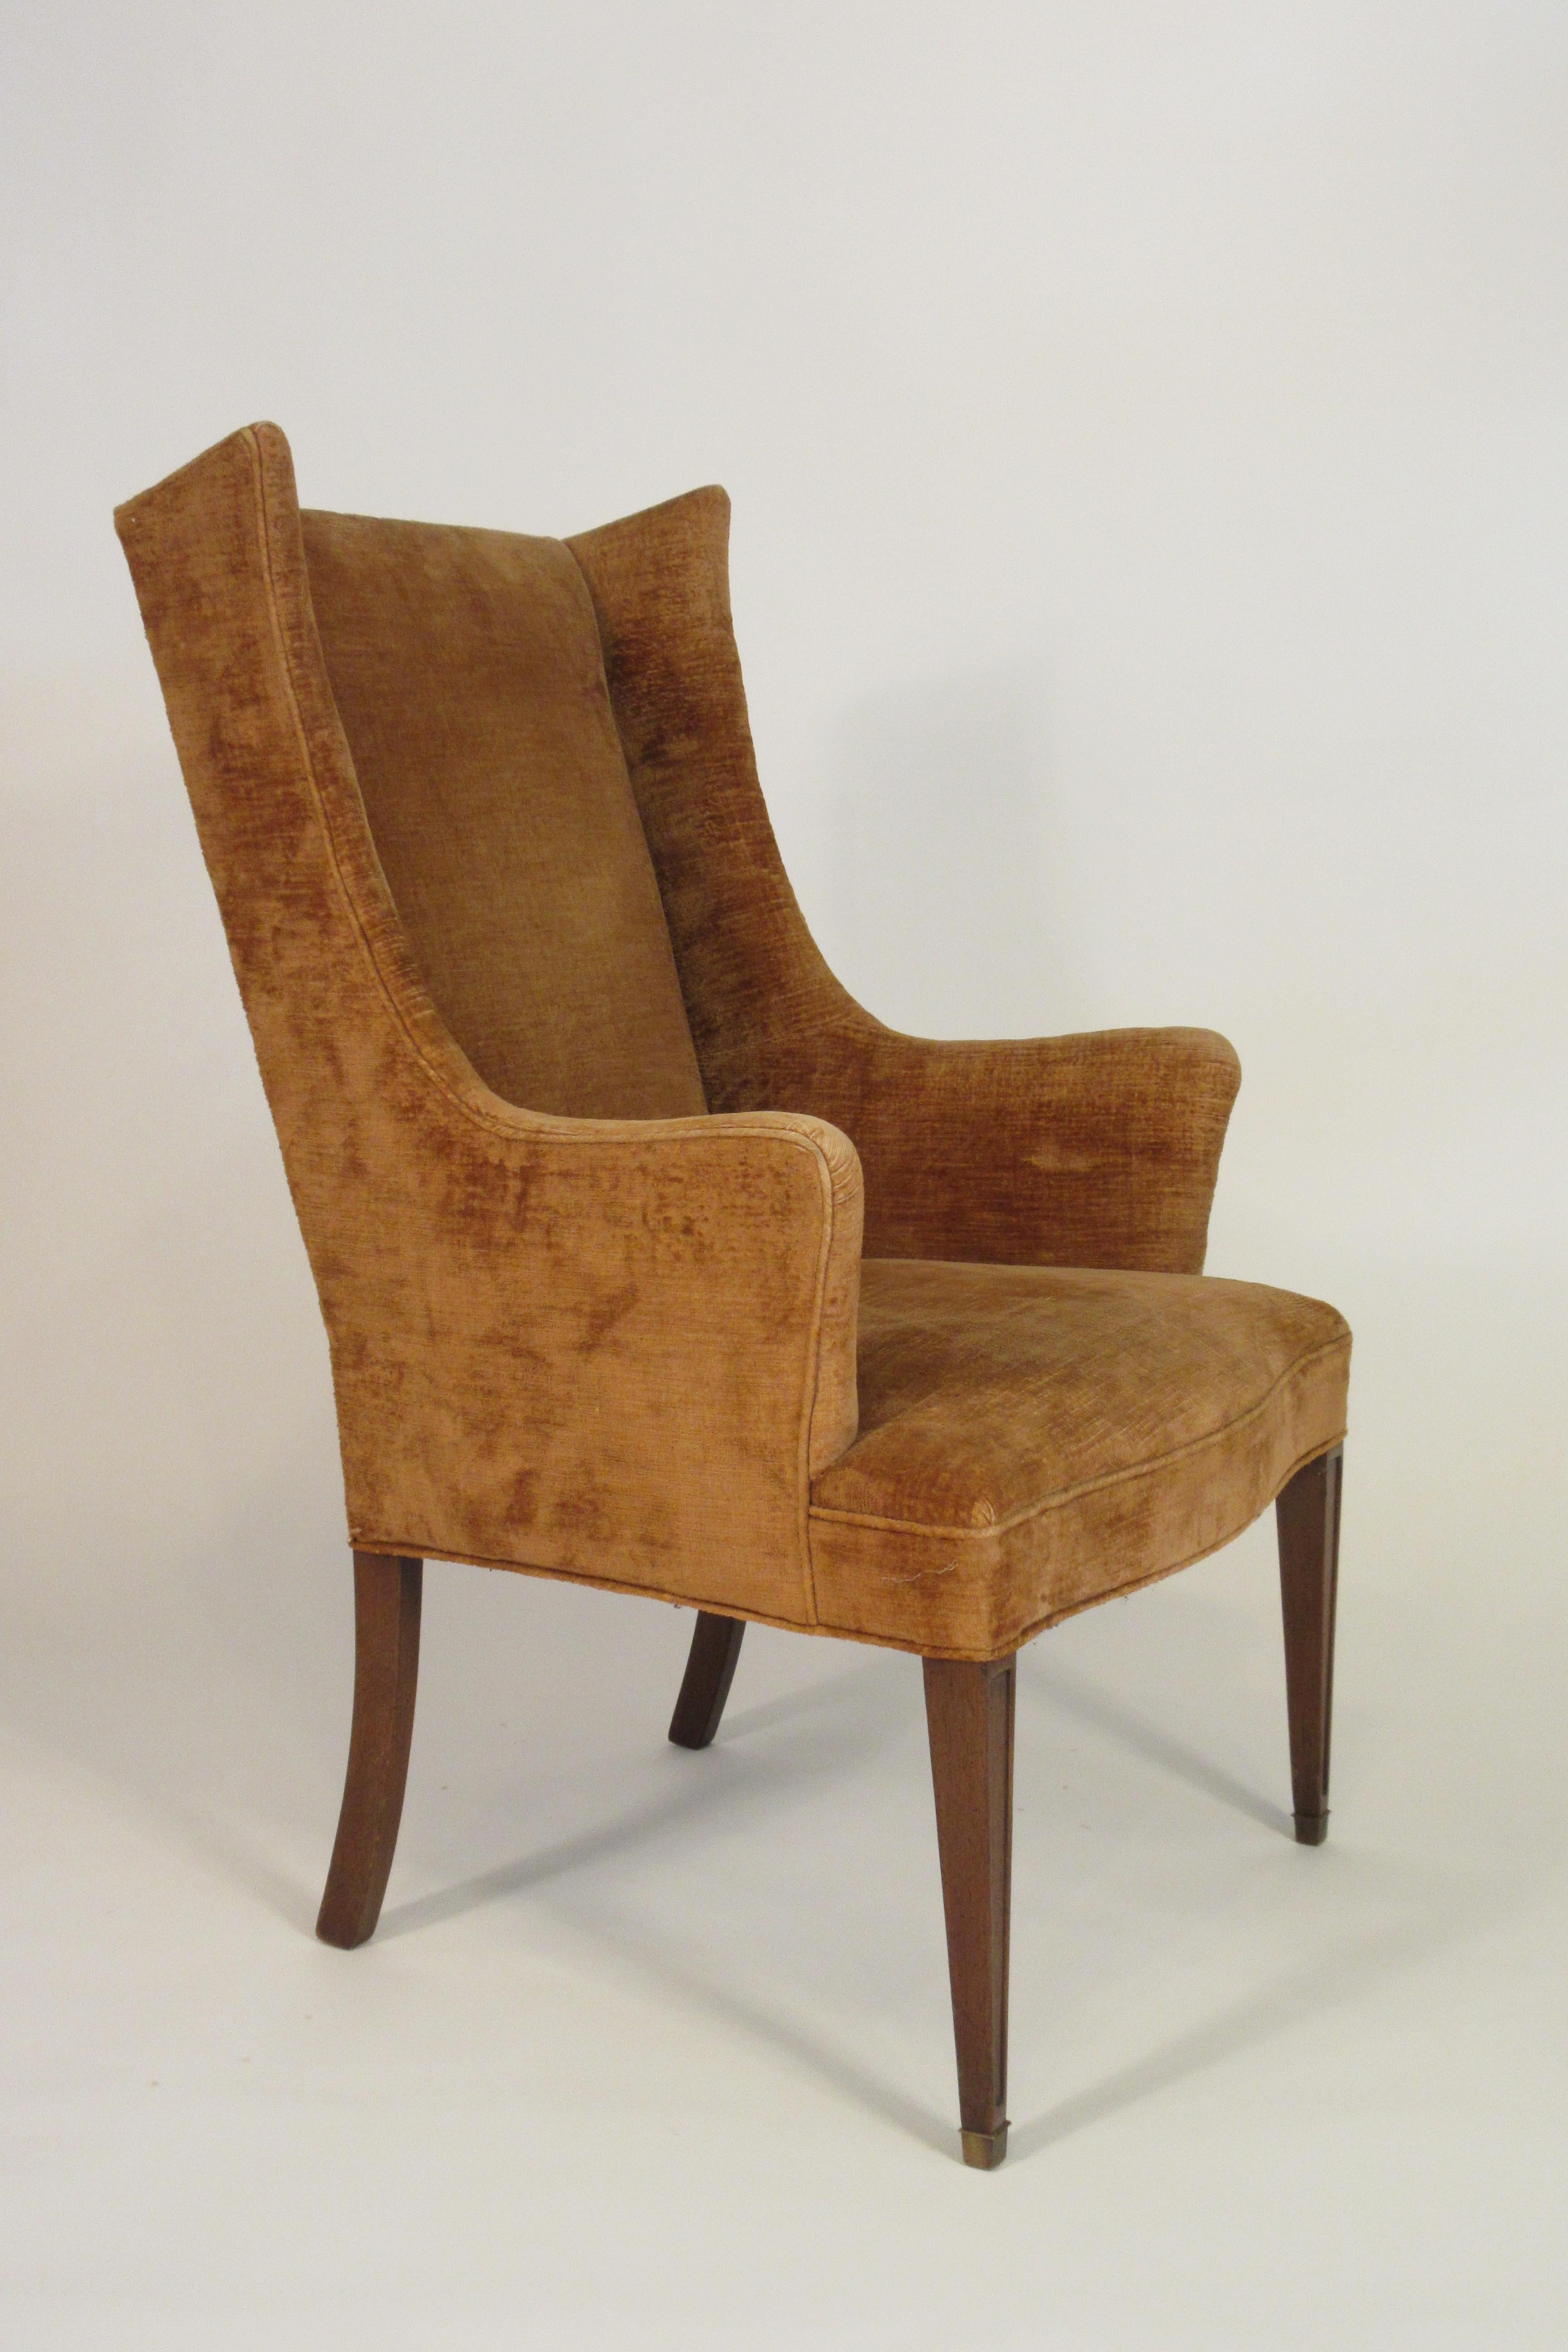 Mid-20th Century Pair of 1950s Chic Wingback Chairs